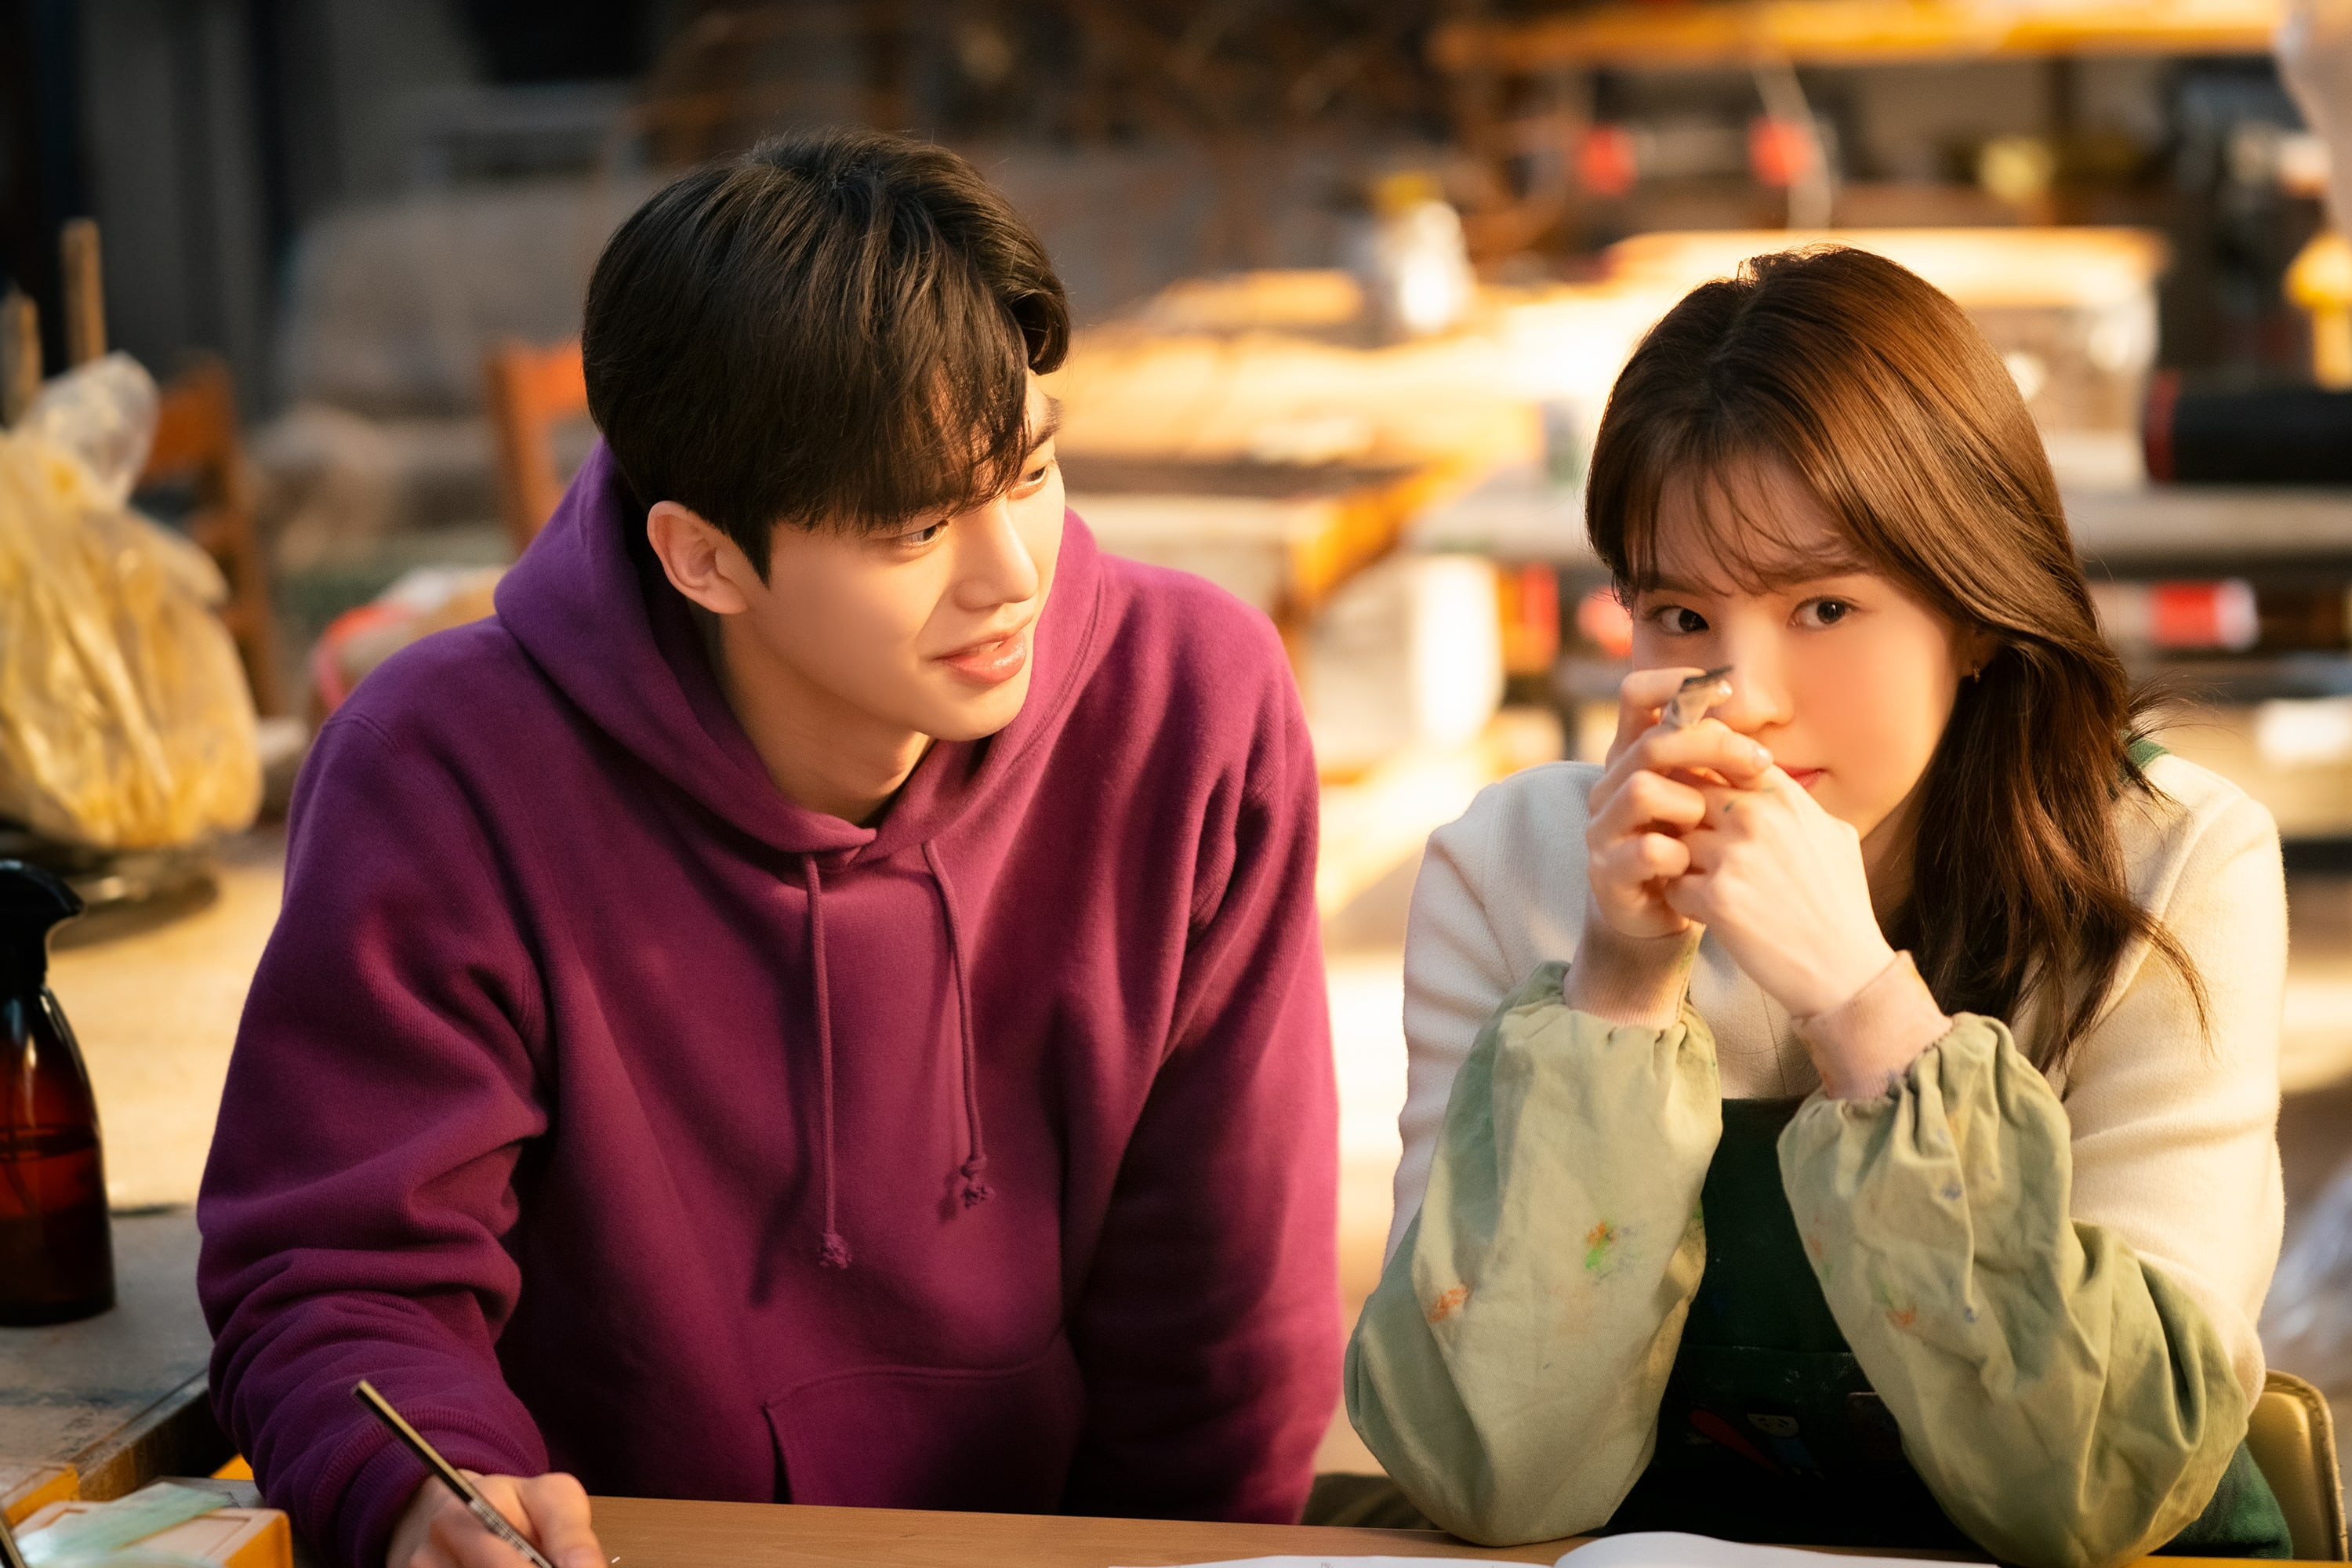 Song Kang And Han So Hee Are A Hardworking And Lovable Duo On The Set Of  “Nevertheless” | Soompi